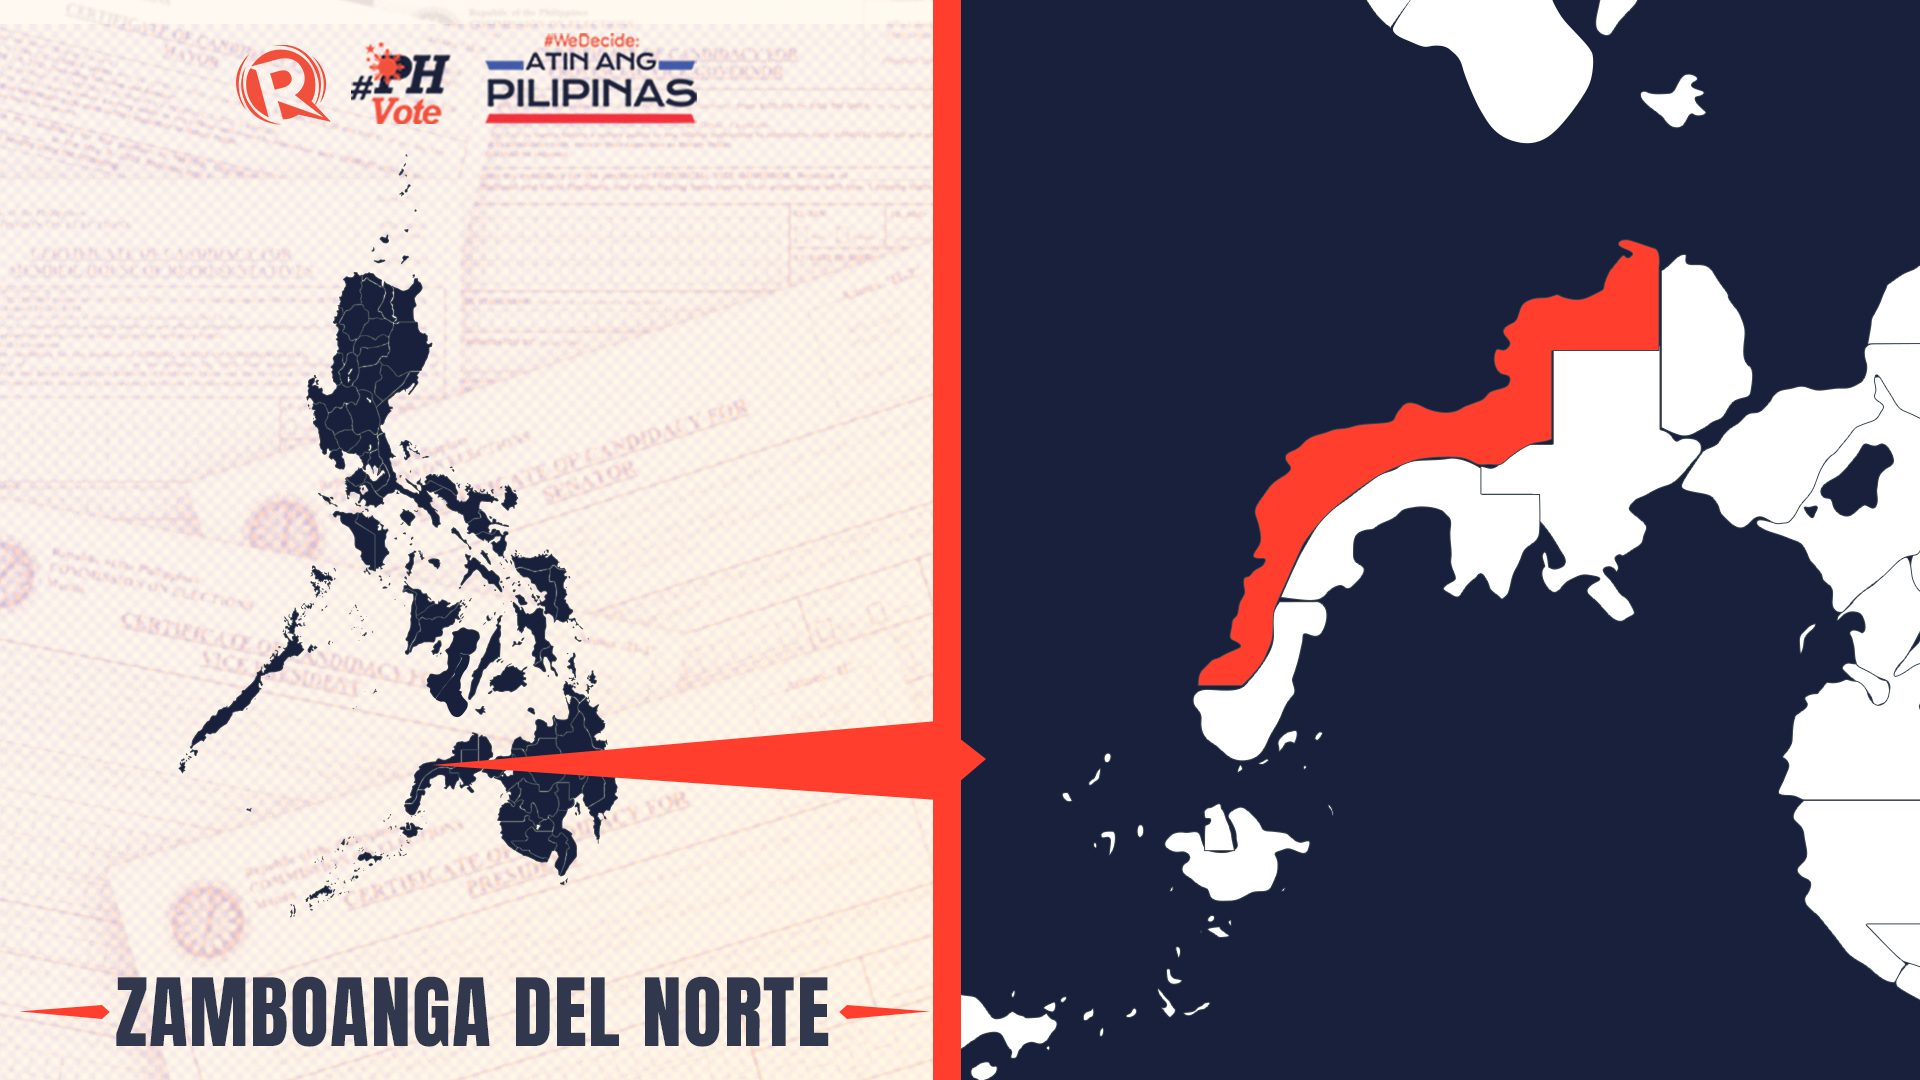 LIST: Who is running in Zamboanga del Norte in the 2022 Philippine elections?